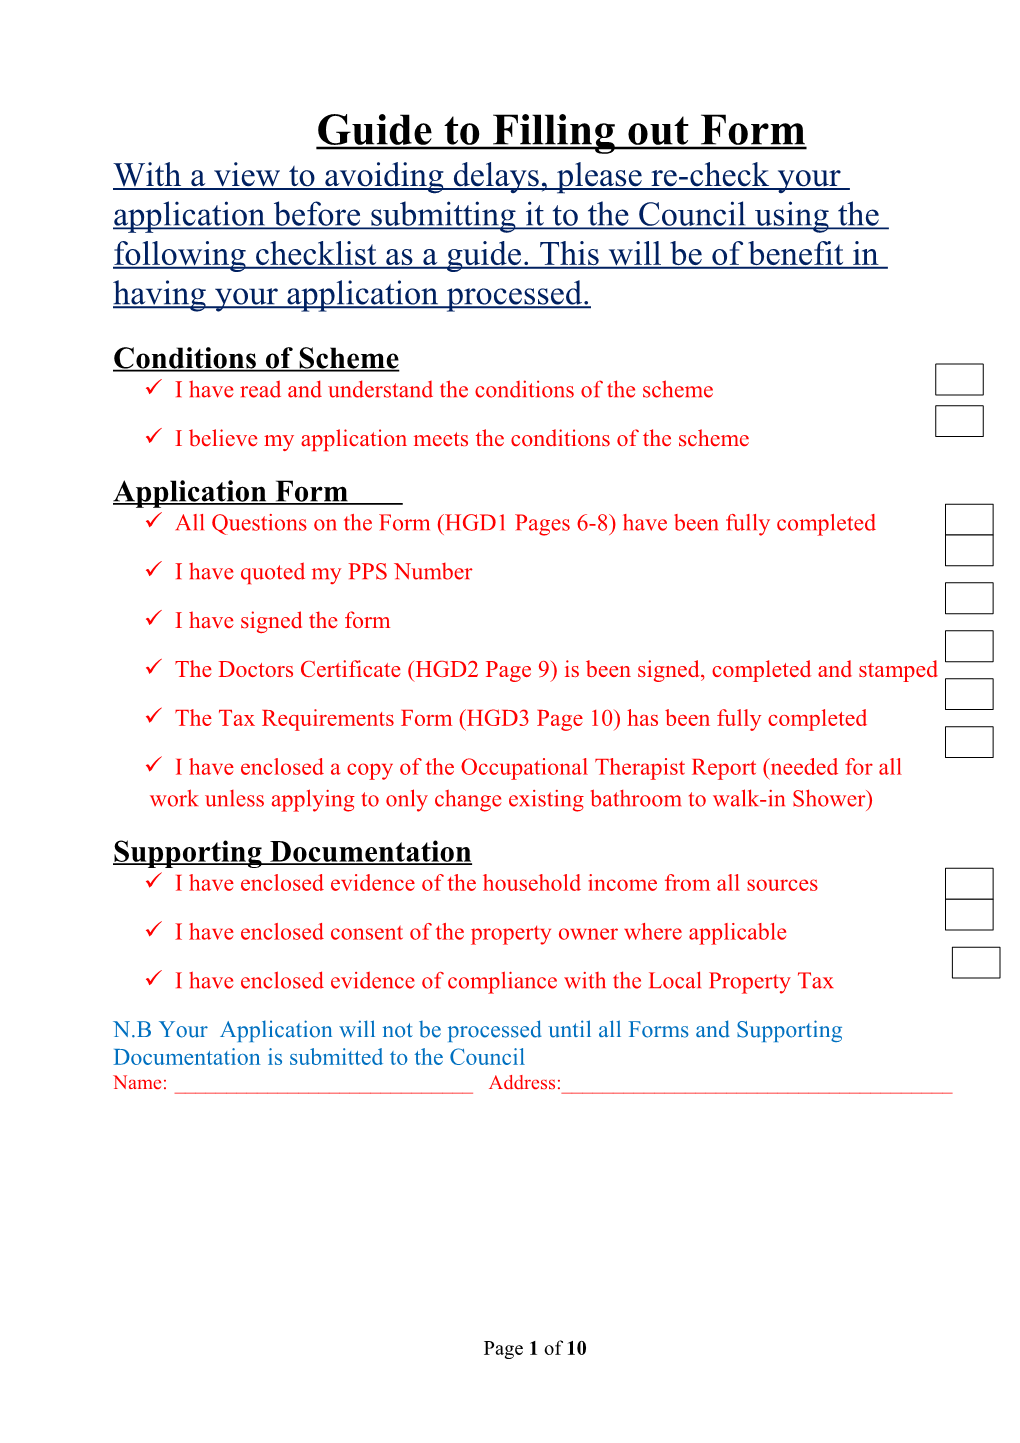 Guide to Filling out Form